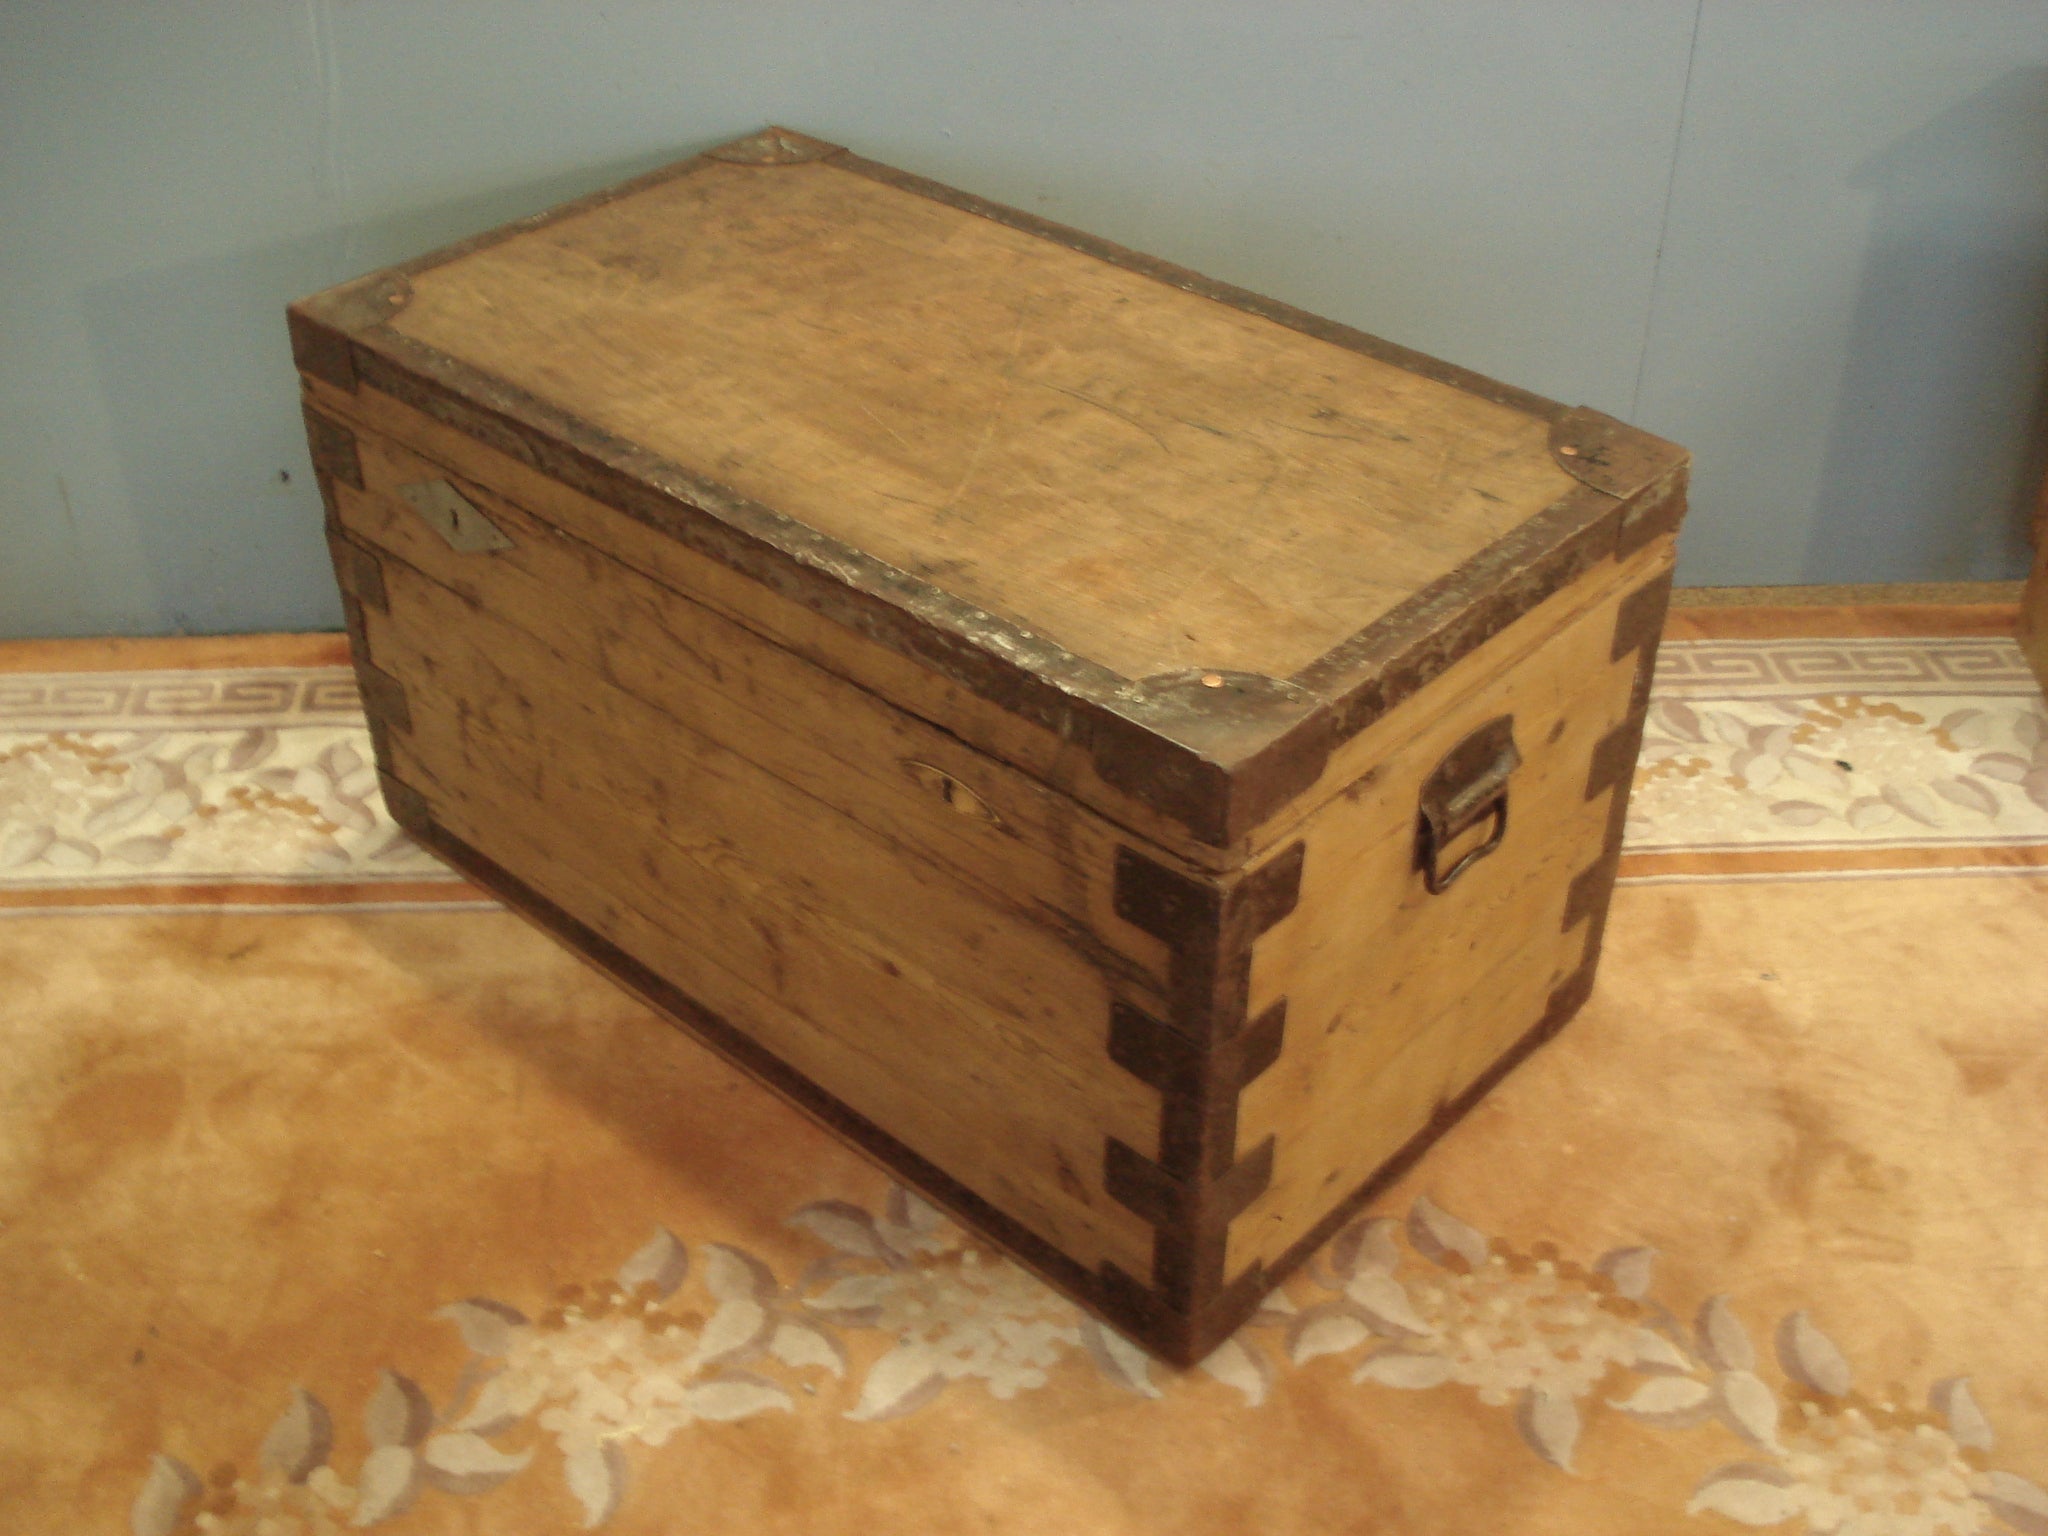 Battered old storage trunk. Zinc lined and with metal banding